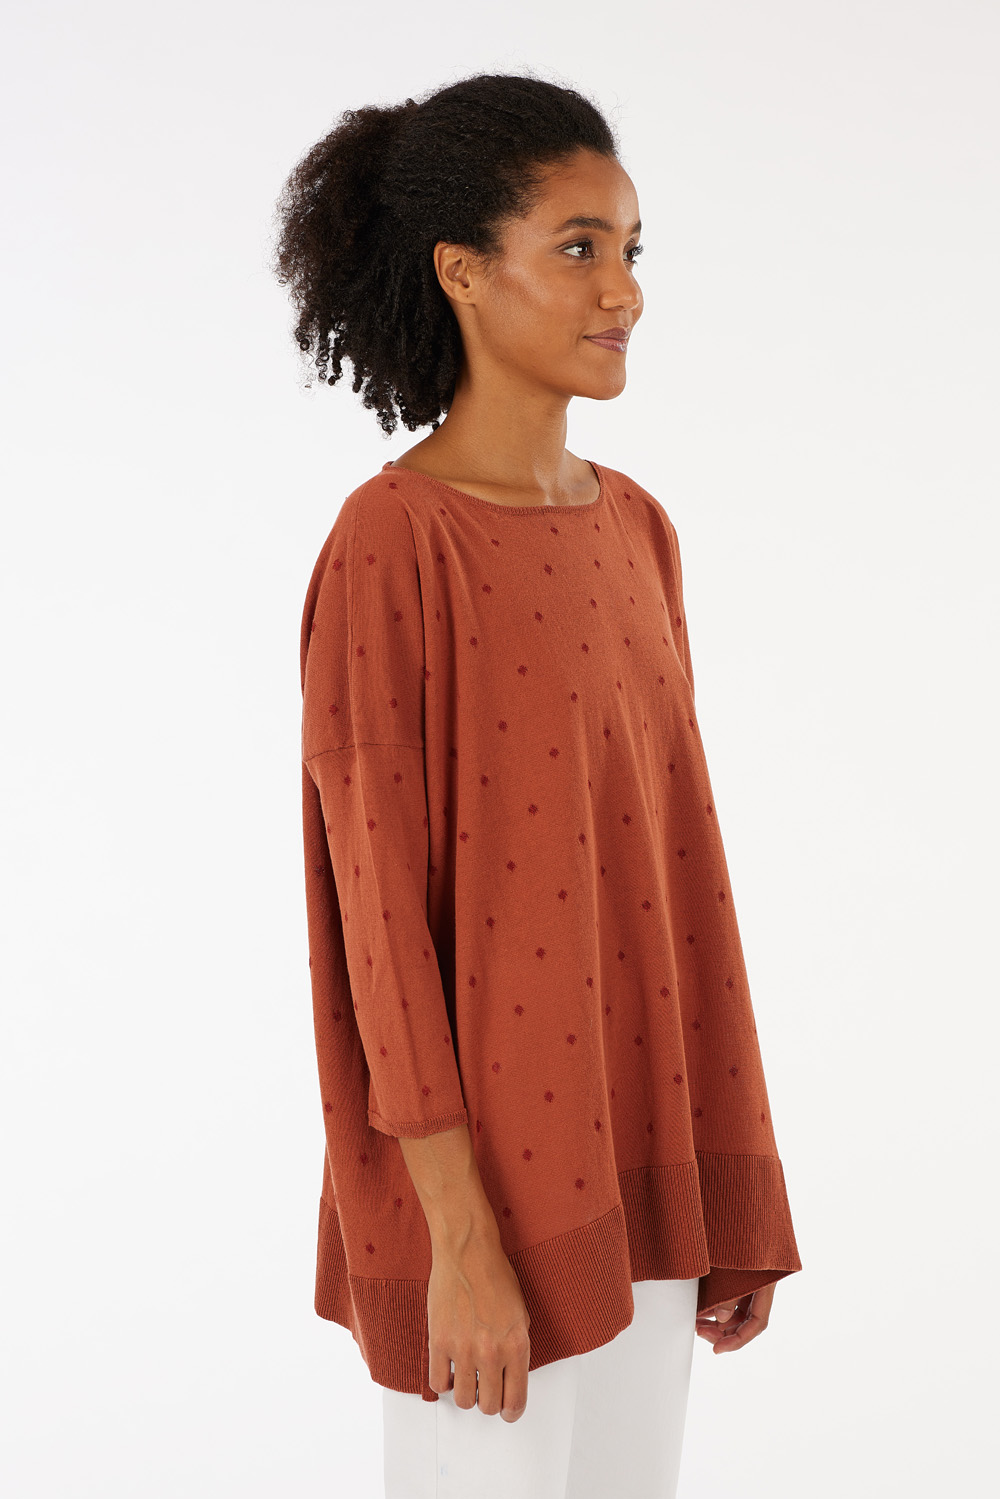 Boat neck sweater in 100% cotton with tone-on-tone shiny viscose polka dots